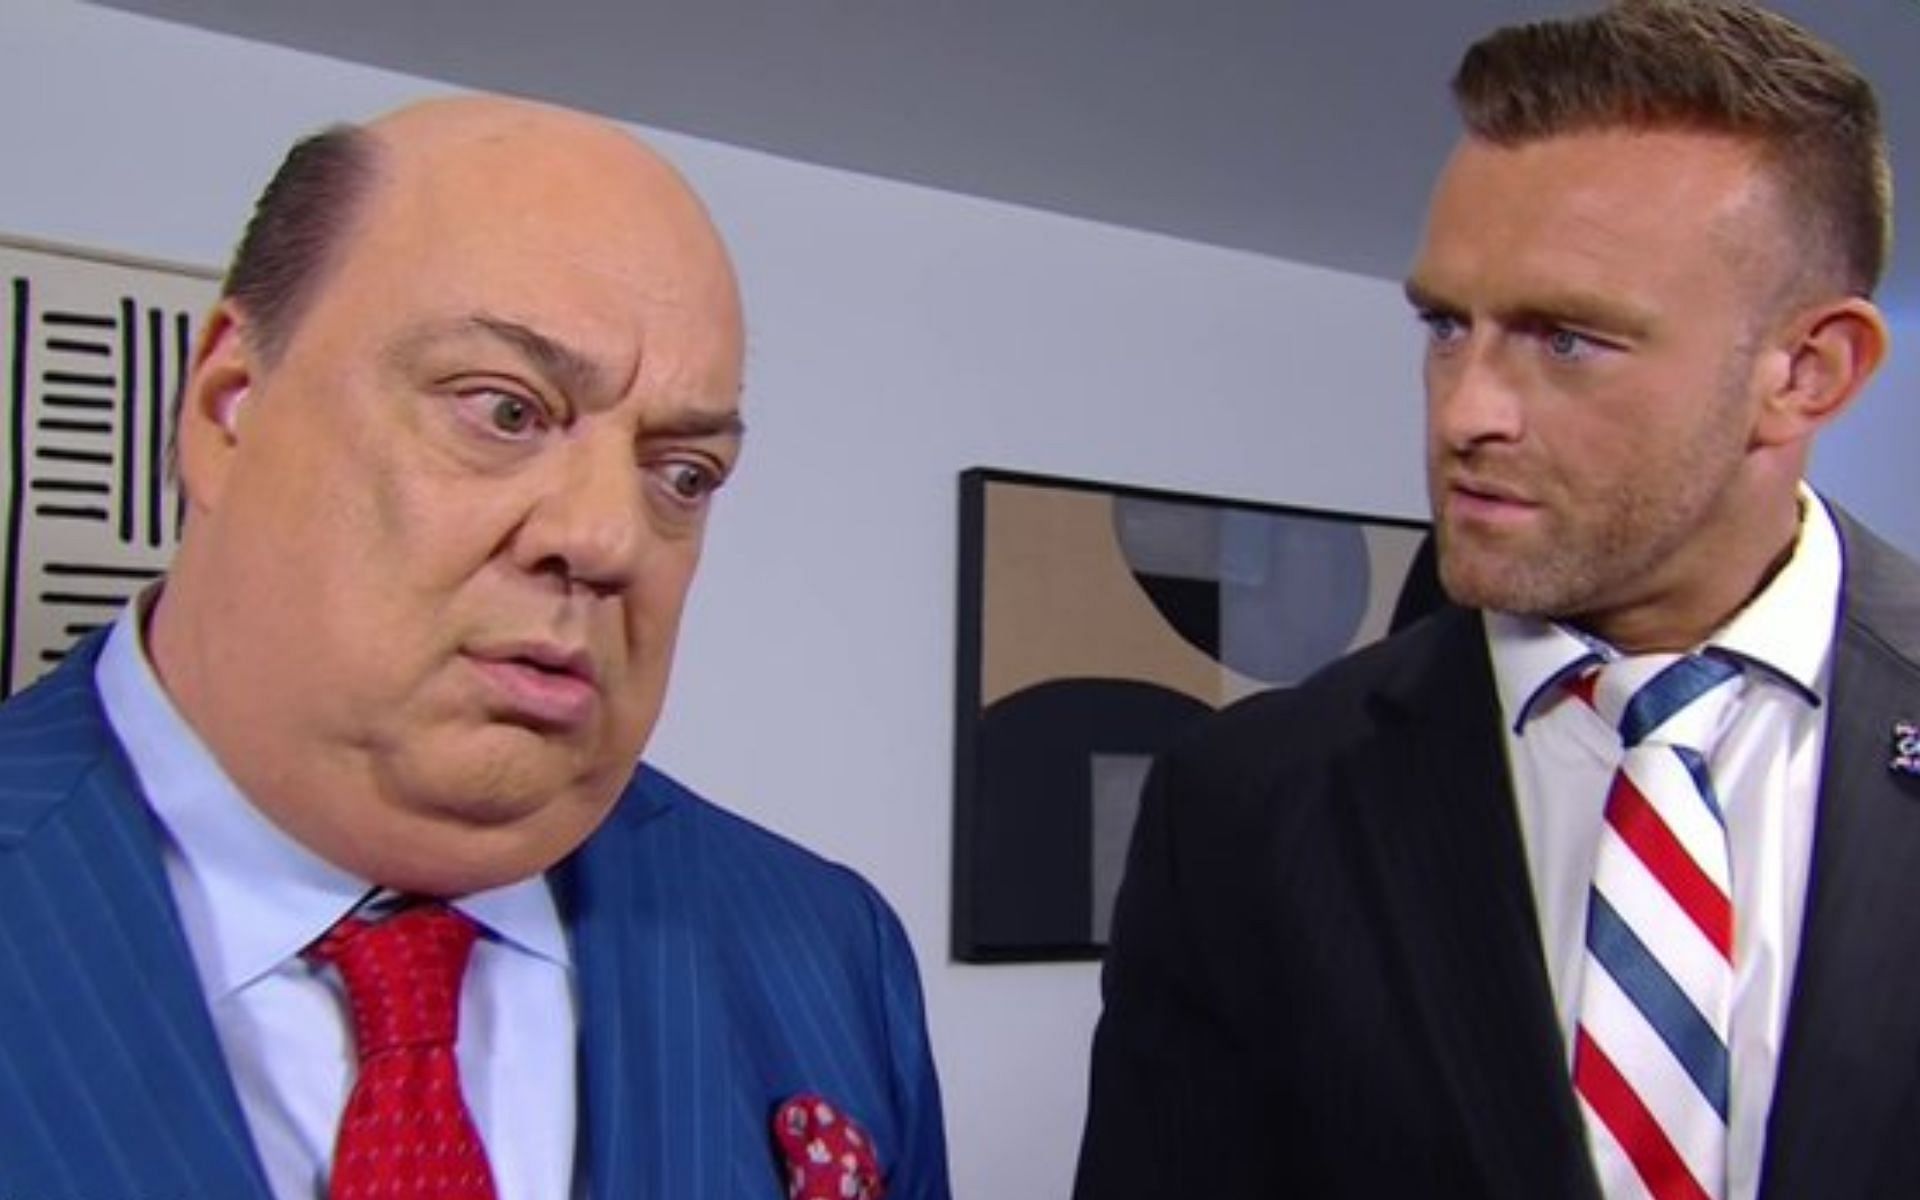 Paul Heyman made a shocking confession to the SmackDown GM